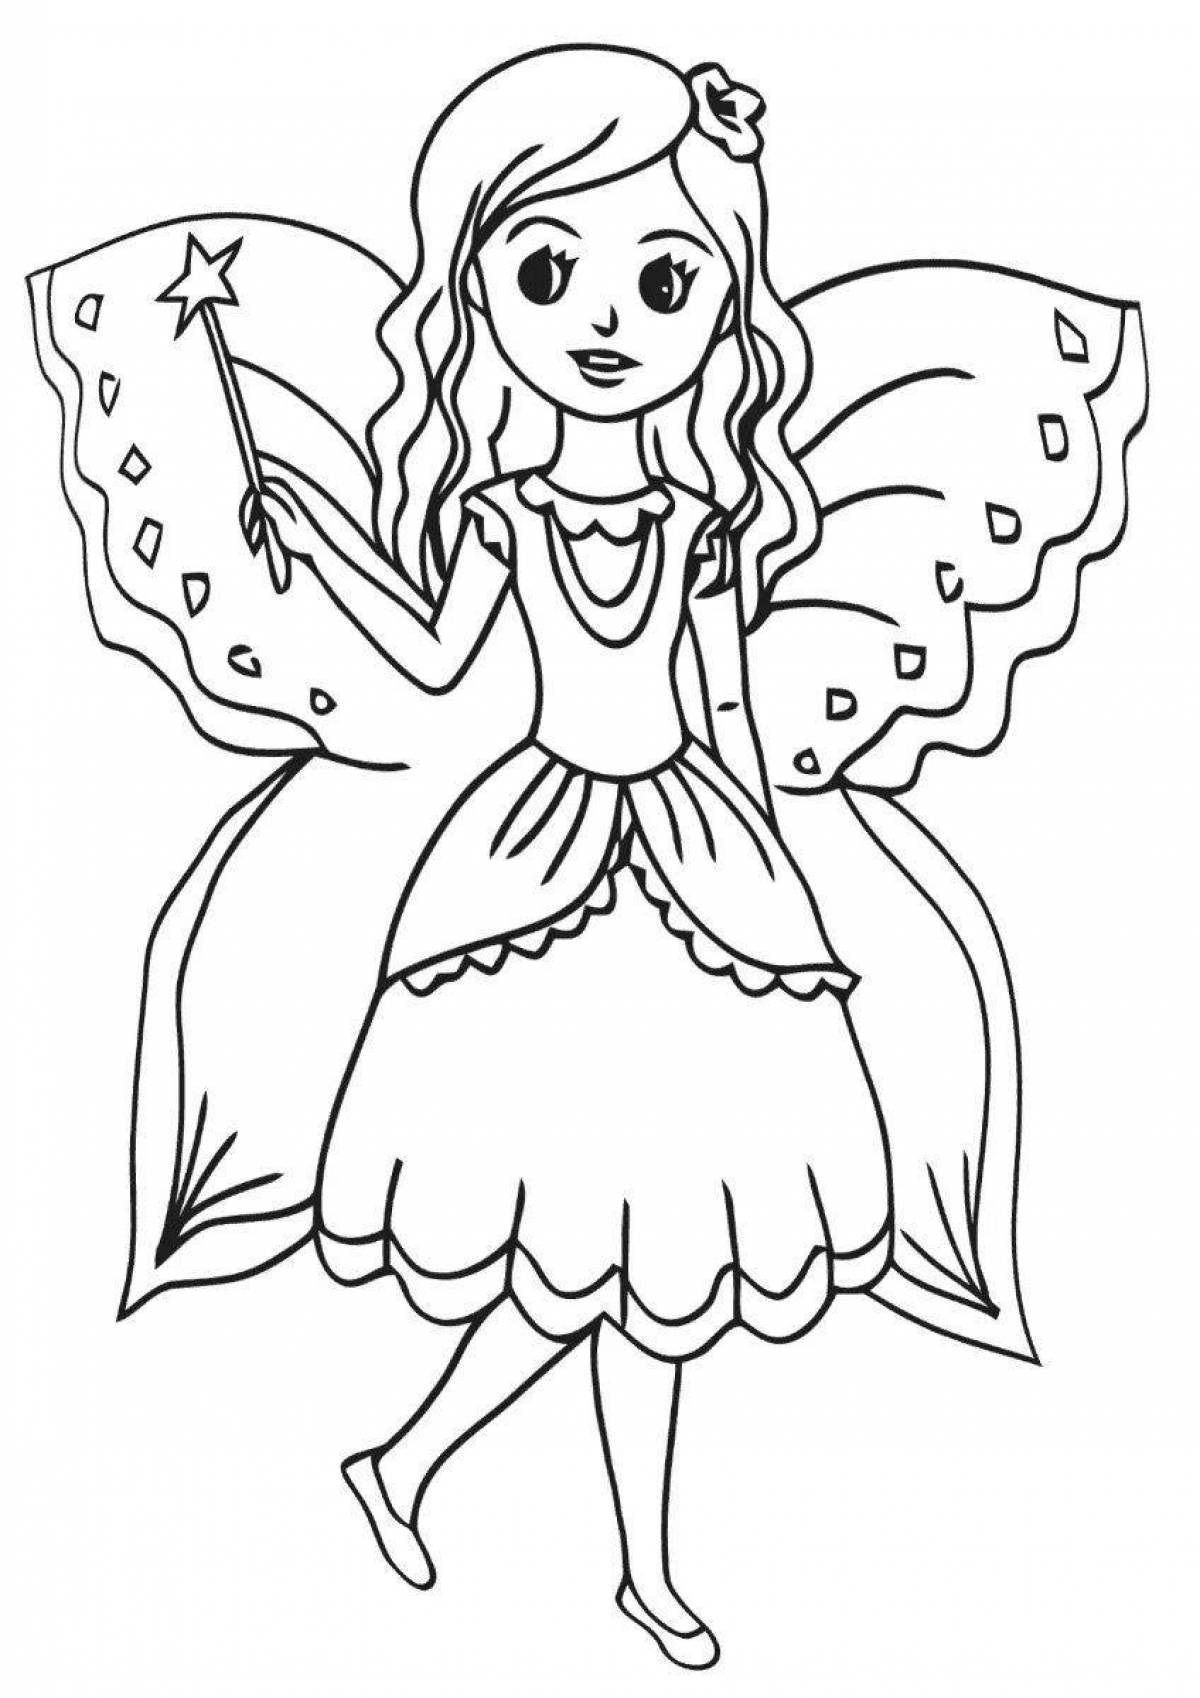 Fun princess coloring pages for girls